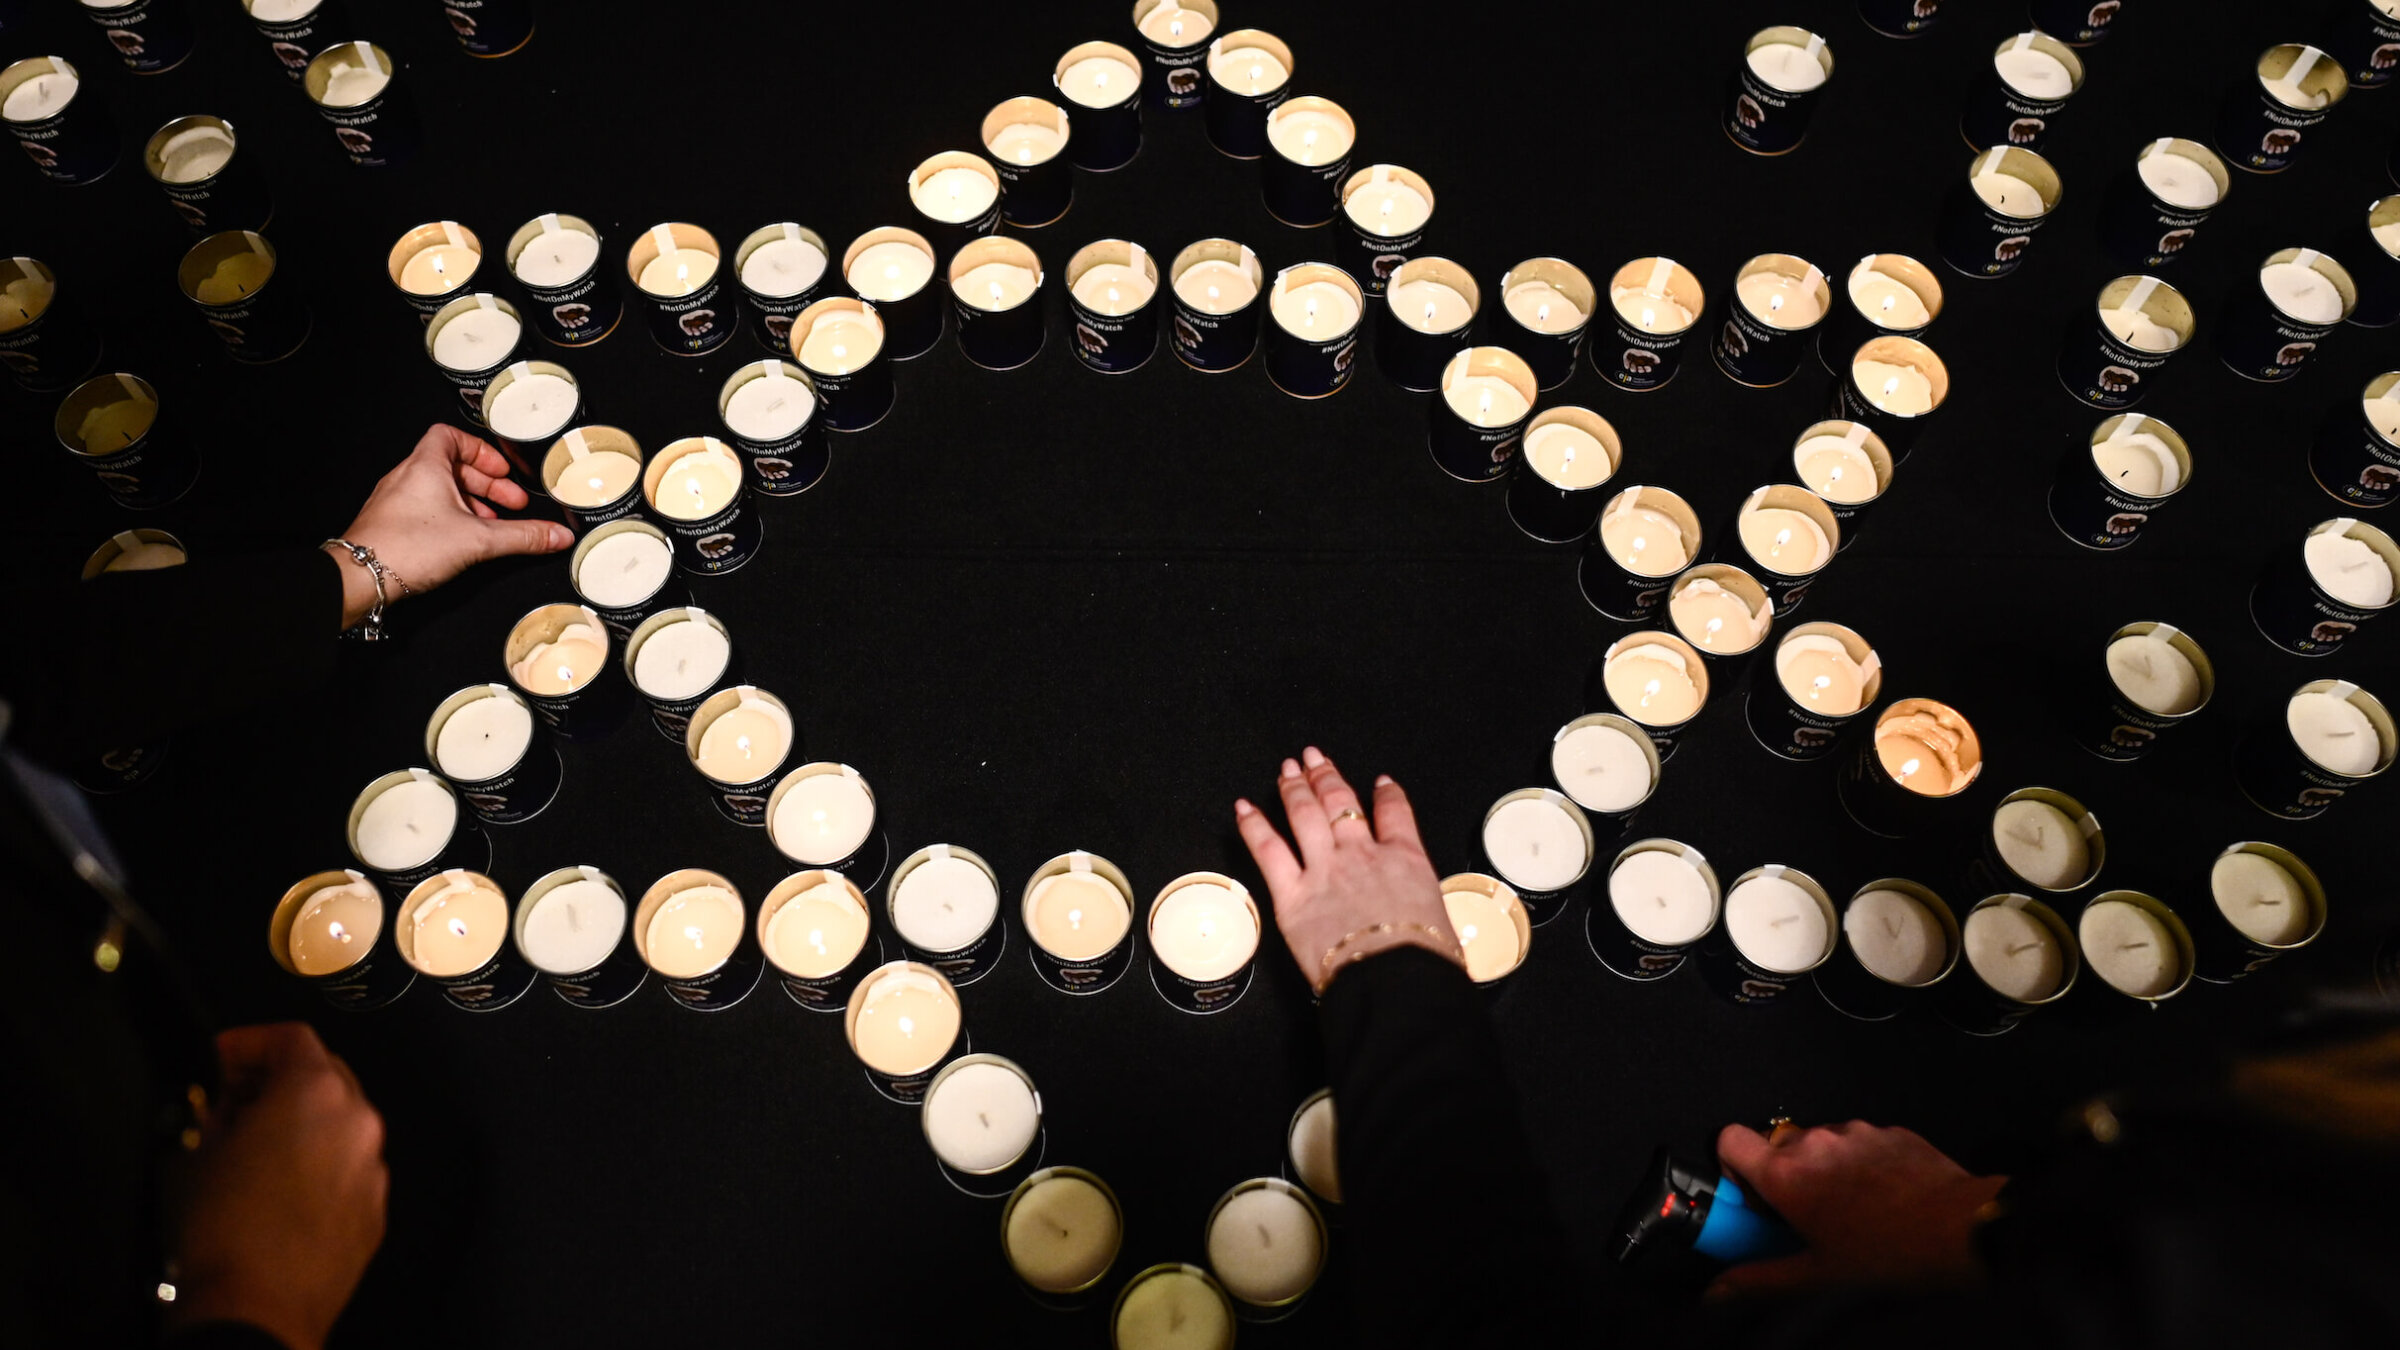 Women light candles in the shape of a Star of David during a January symposium on fighting antisemitism in Krakow, Poland.